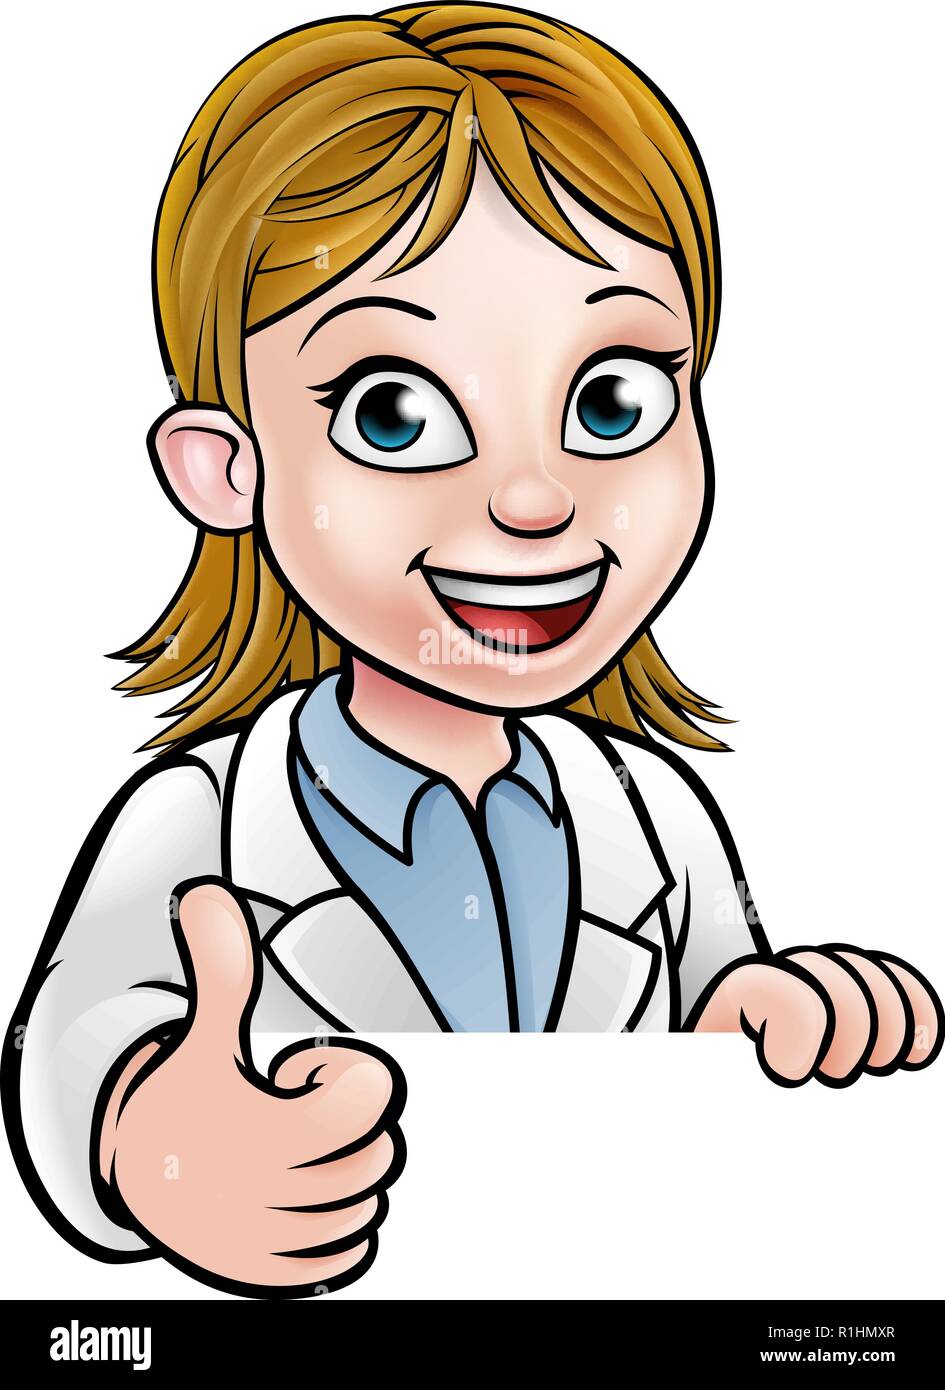 Thumbs Up Scientist Cartoon Character Sign Stock Vector